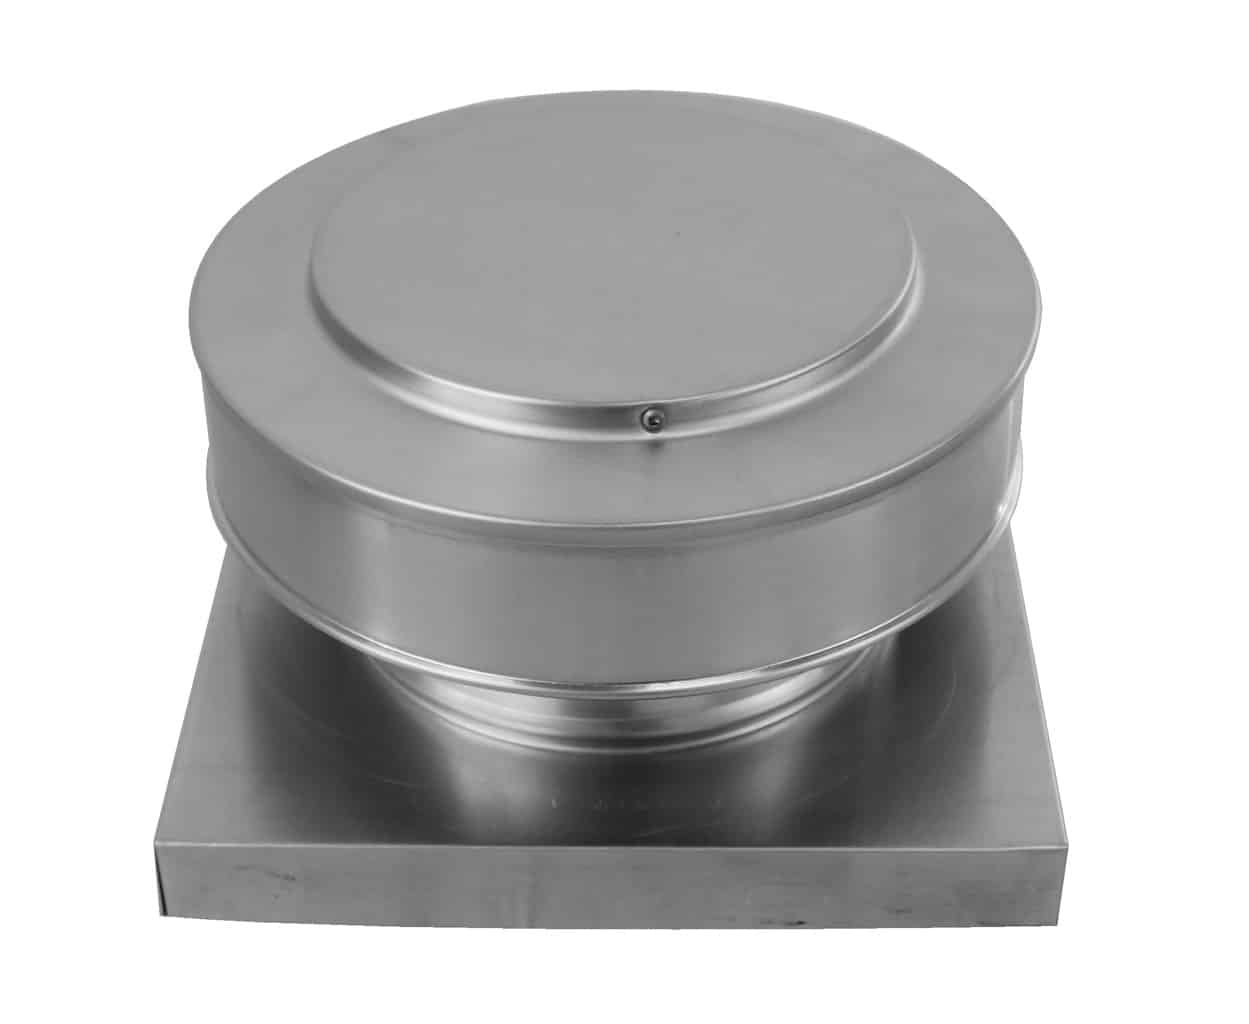 Air Vent Roof Mount Metal Vent Replacement Dome 